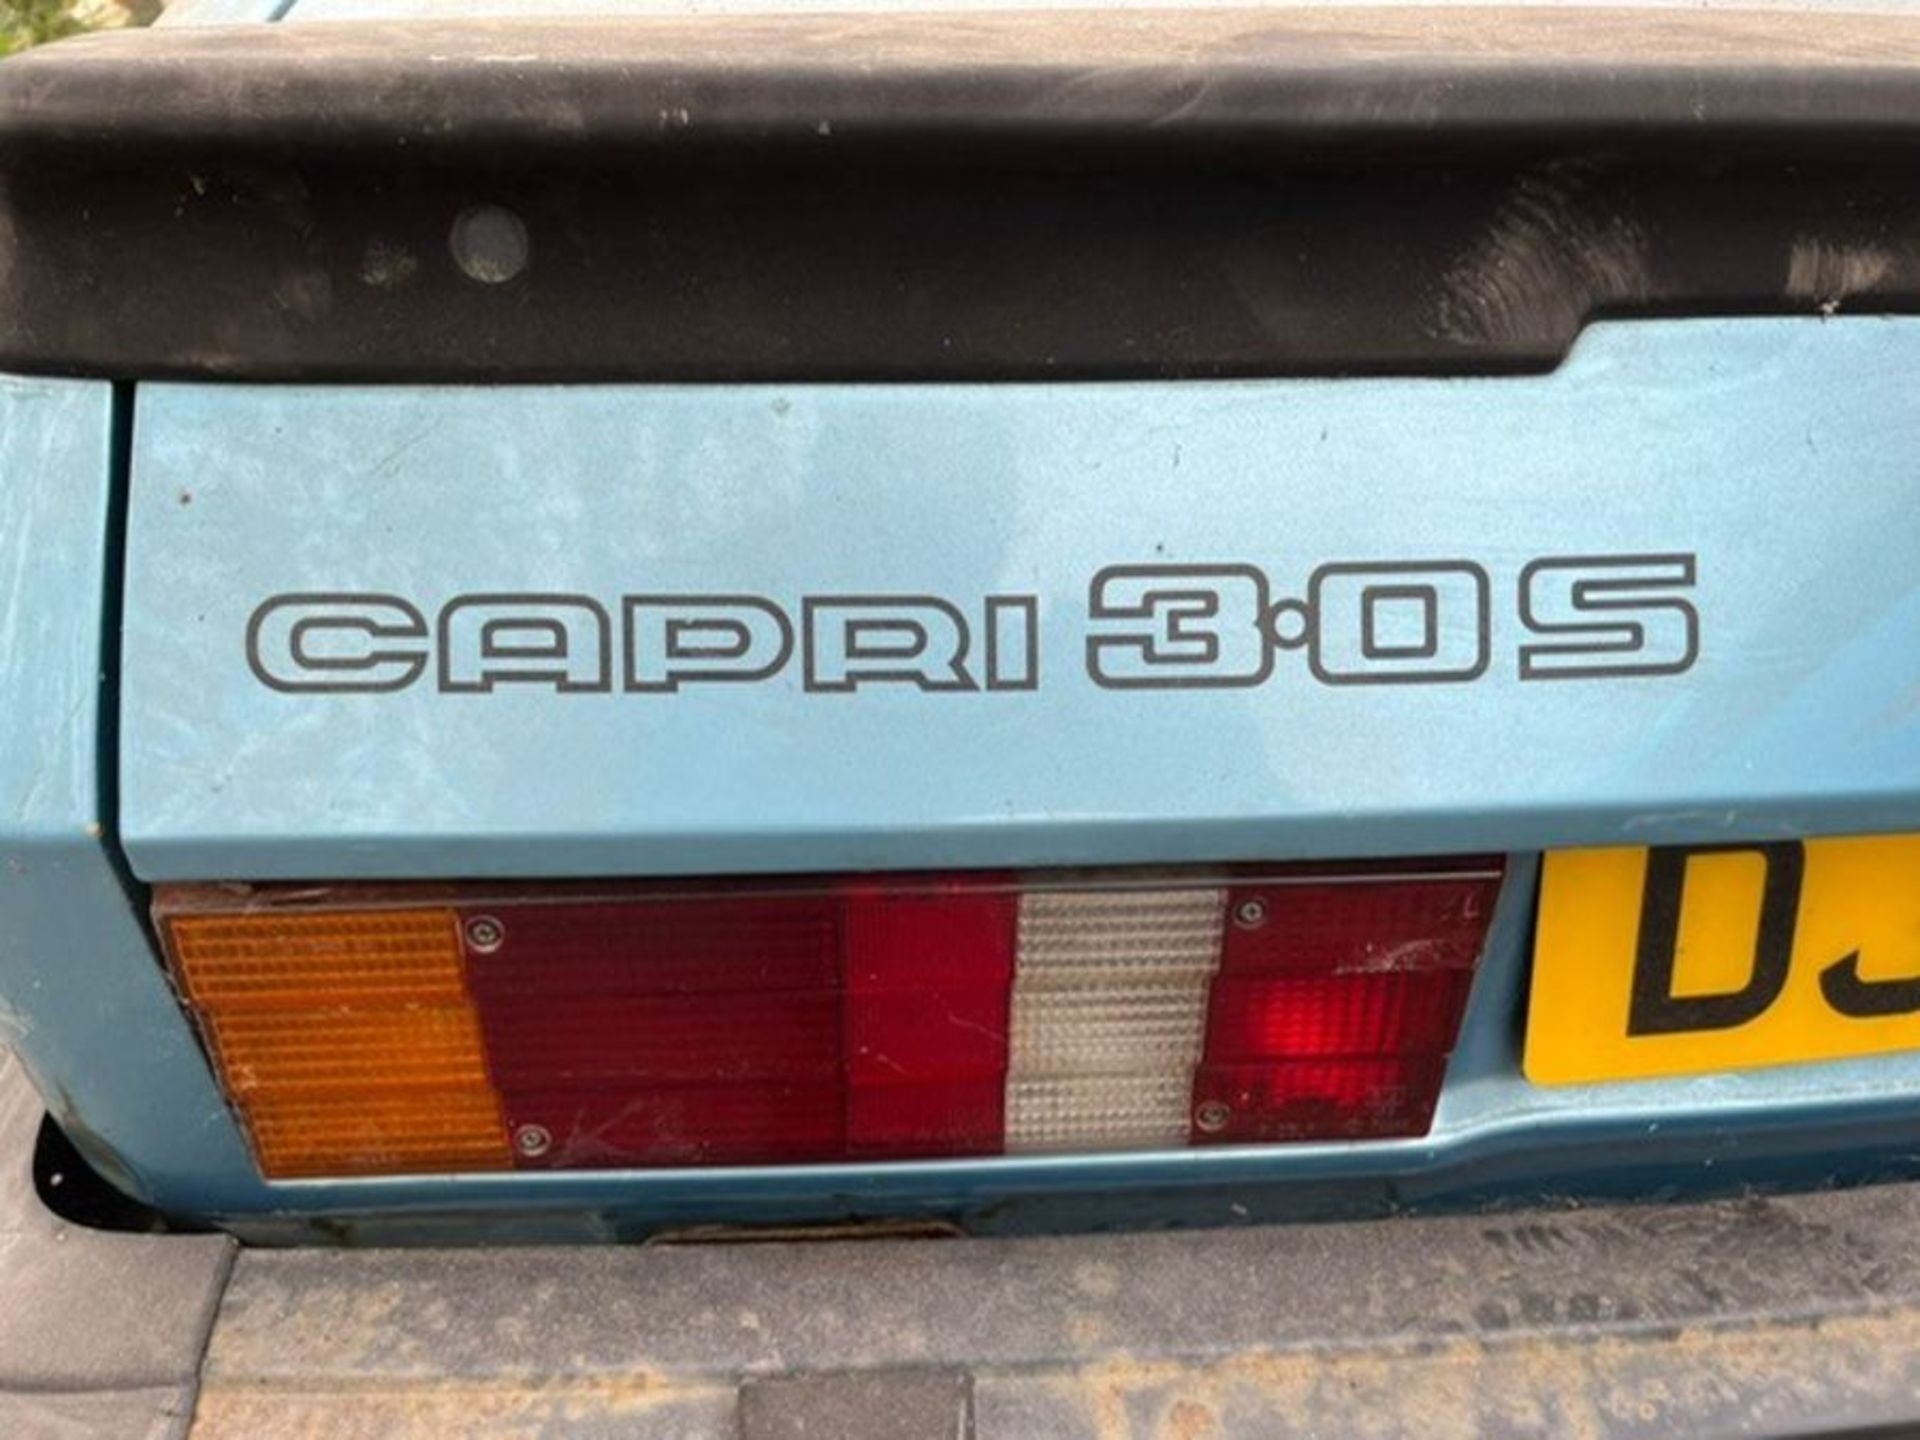 1979 Ford Capri 3.0s MkIII manual Although running and driving, this 4 speed manual 3.0s is - Image 82 of 168